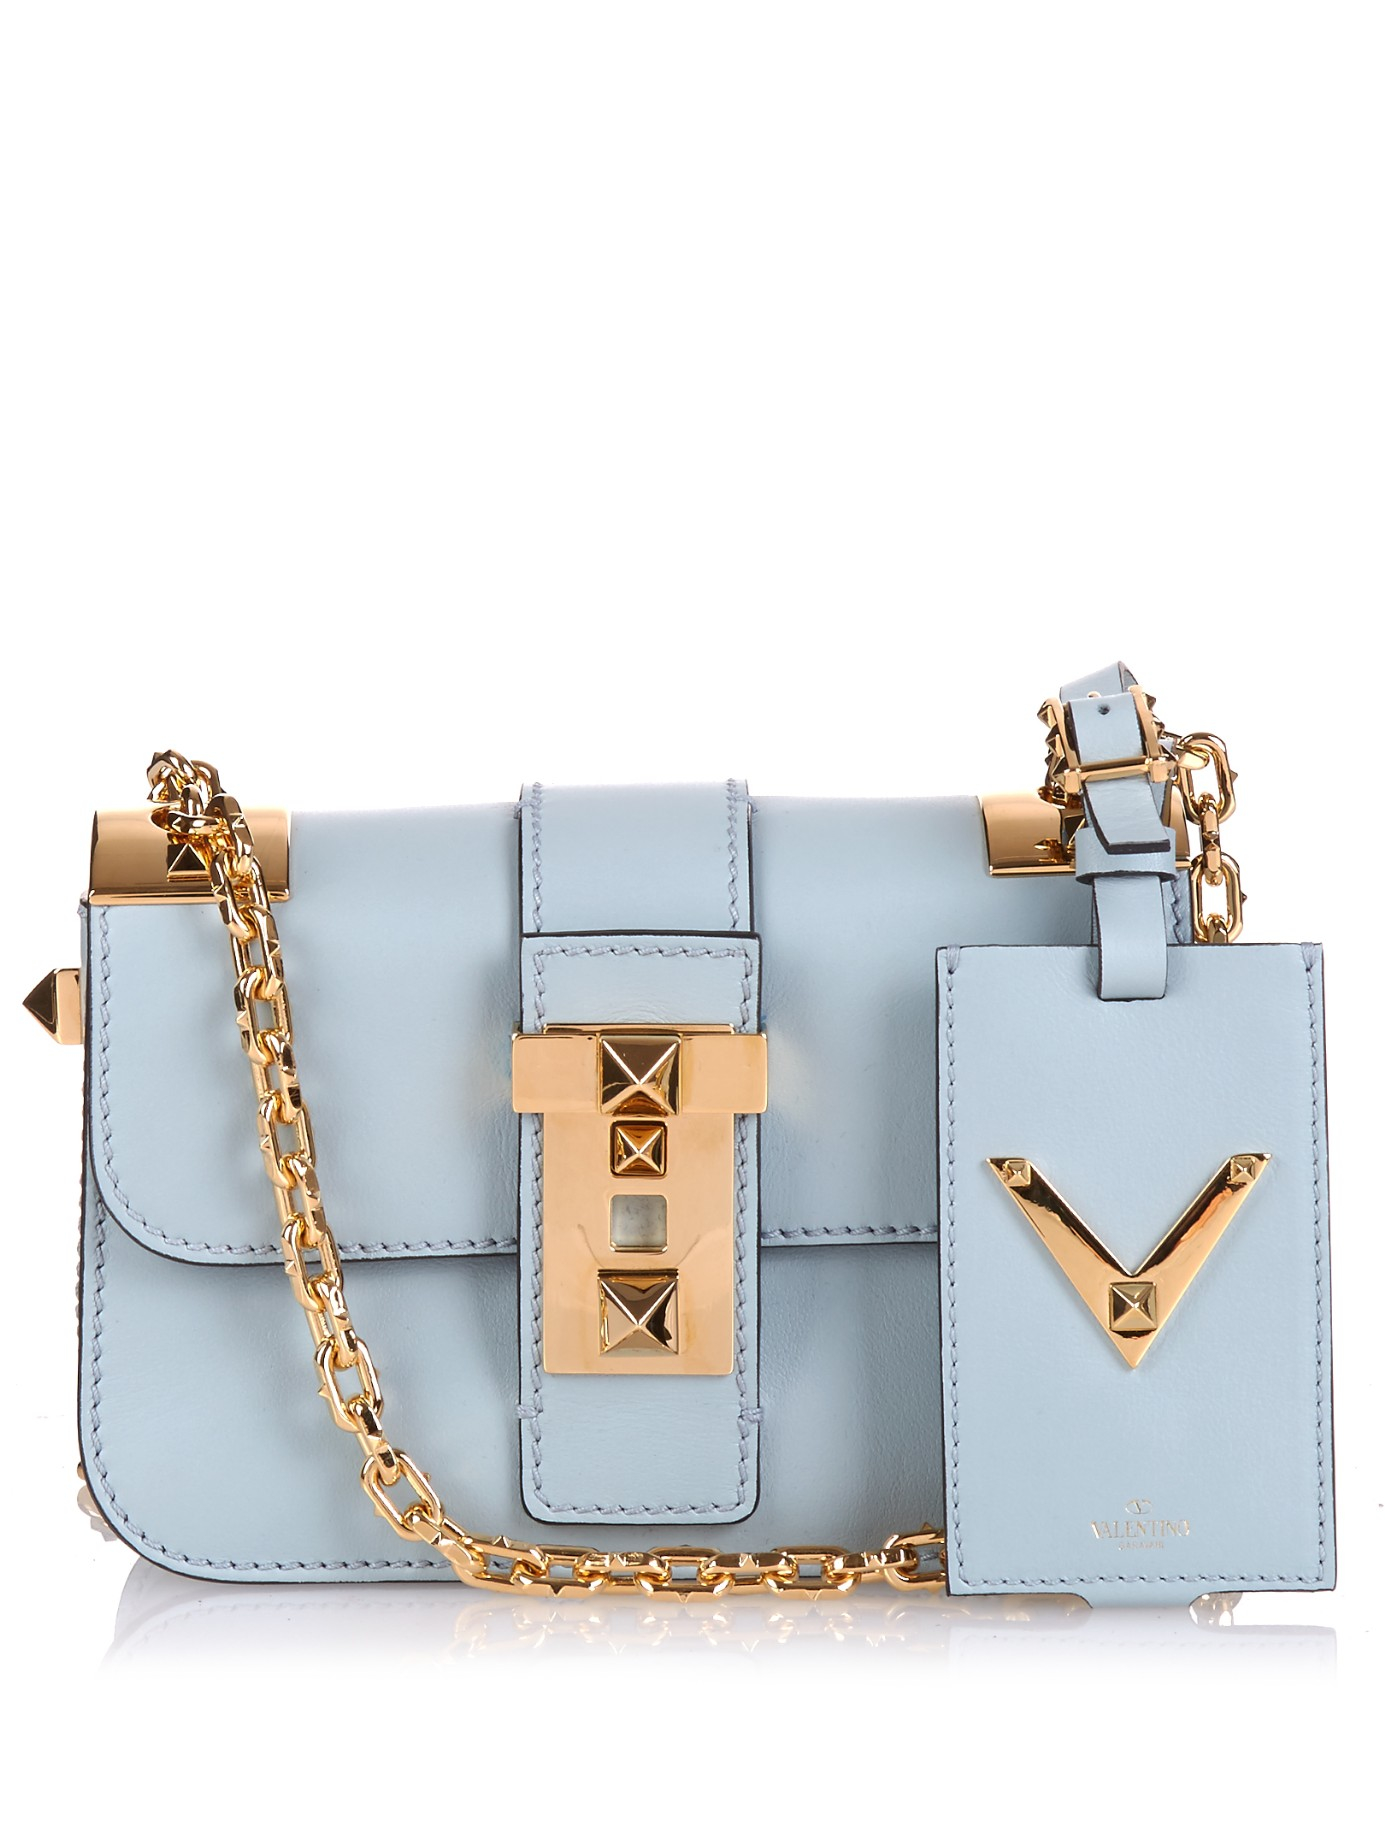 Lyst - Valentino Small B-rockstud Leather Shoulder Bag in Blue